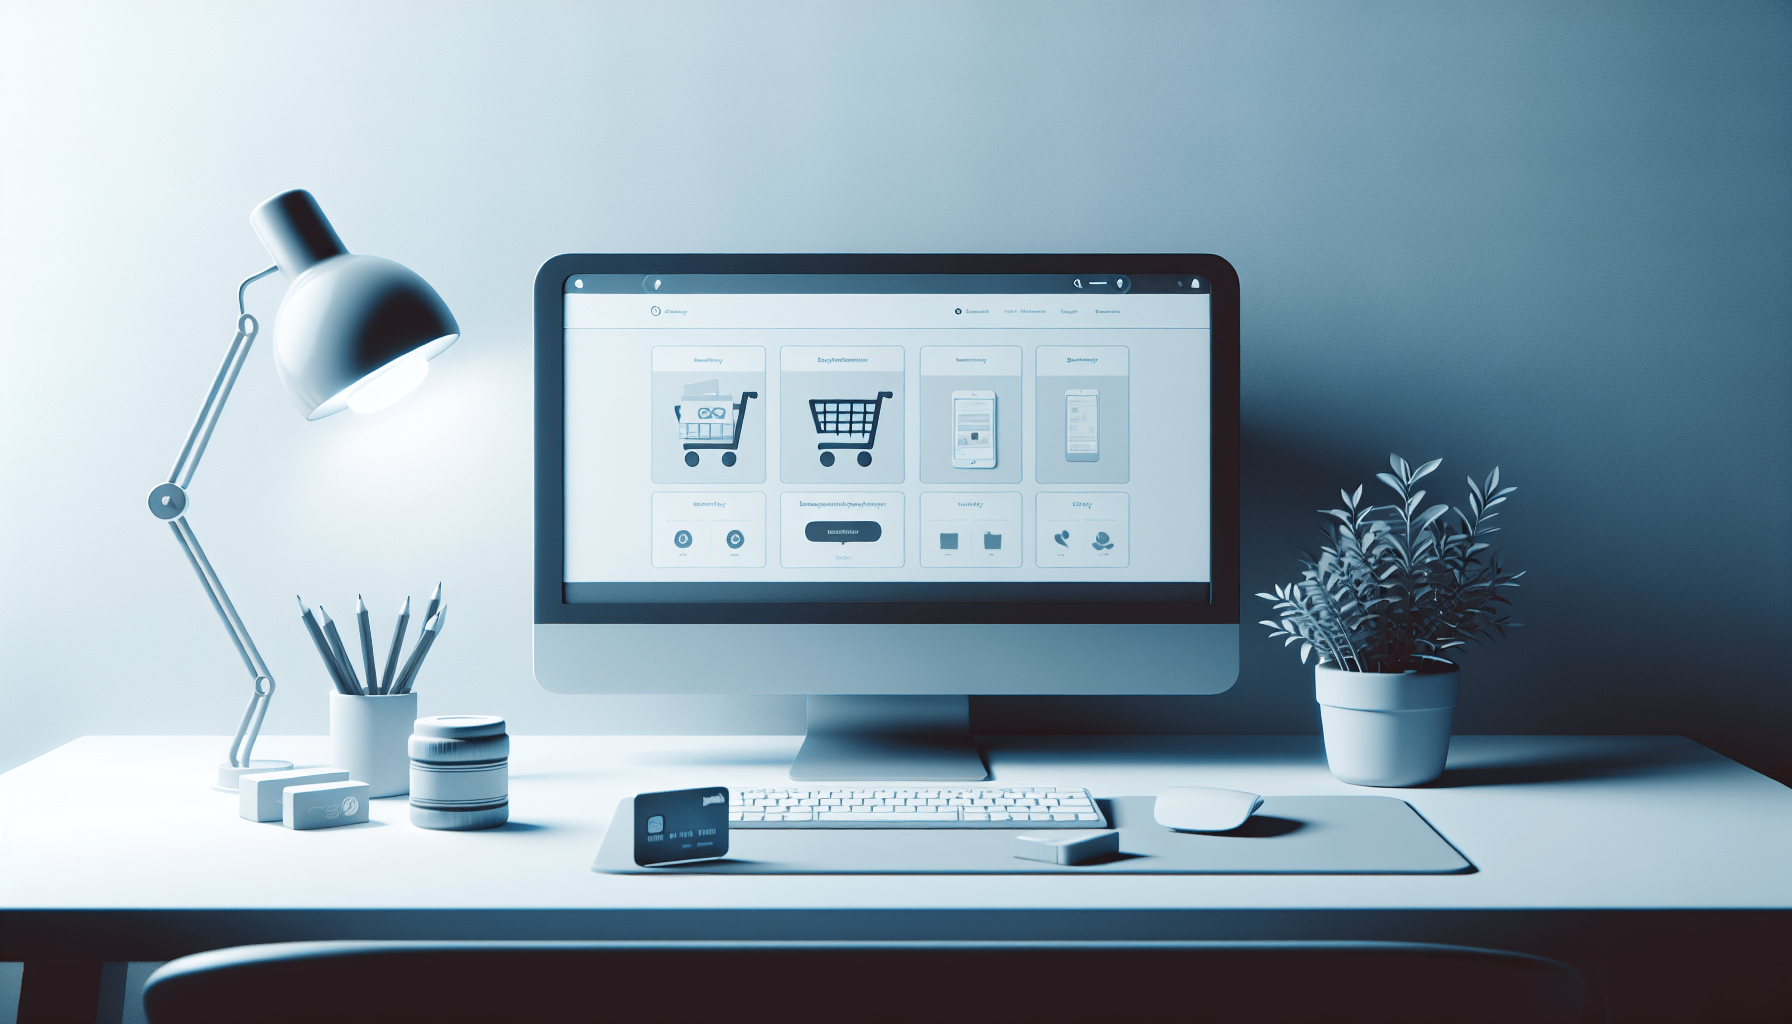 How To Create An Online Store With Woocommerce | Ecommerce Tutorial For Beginners